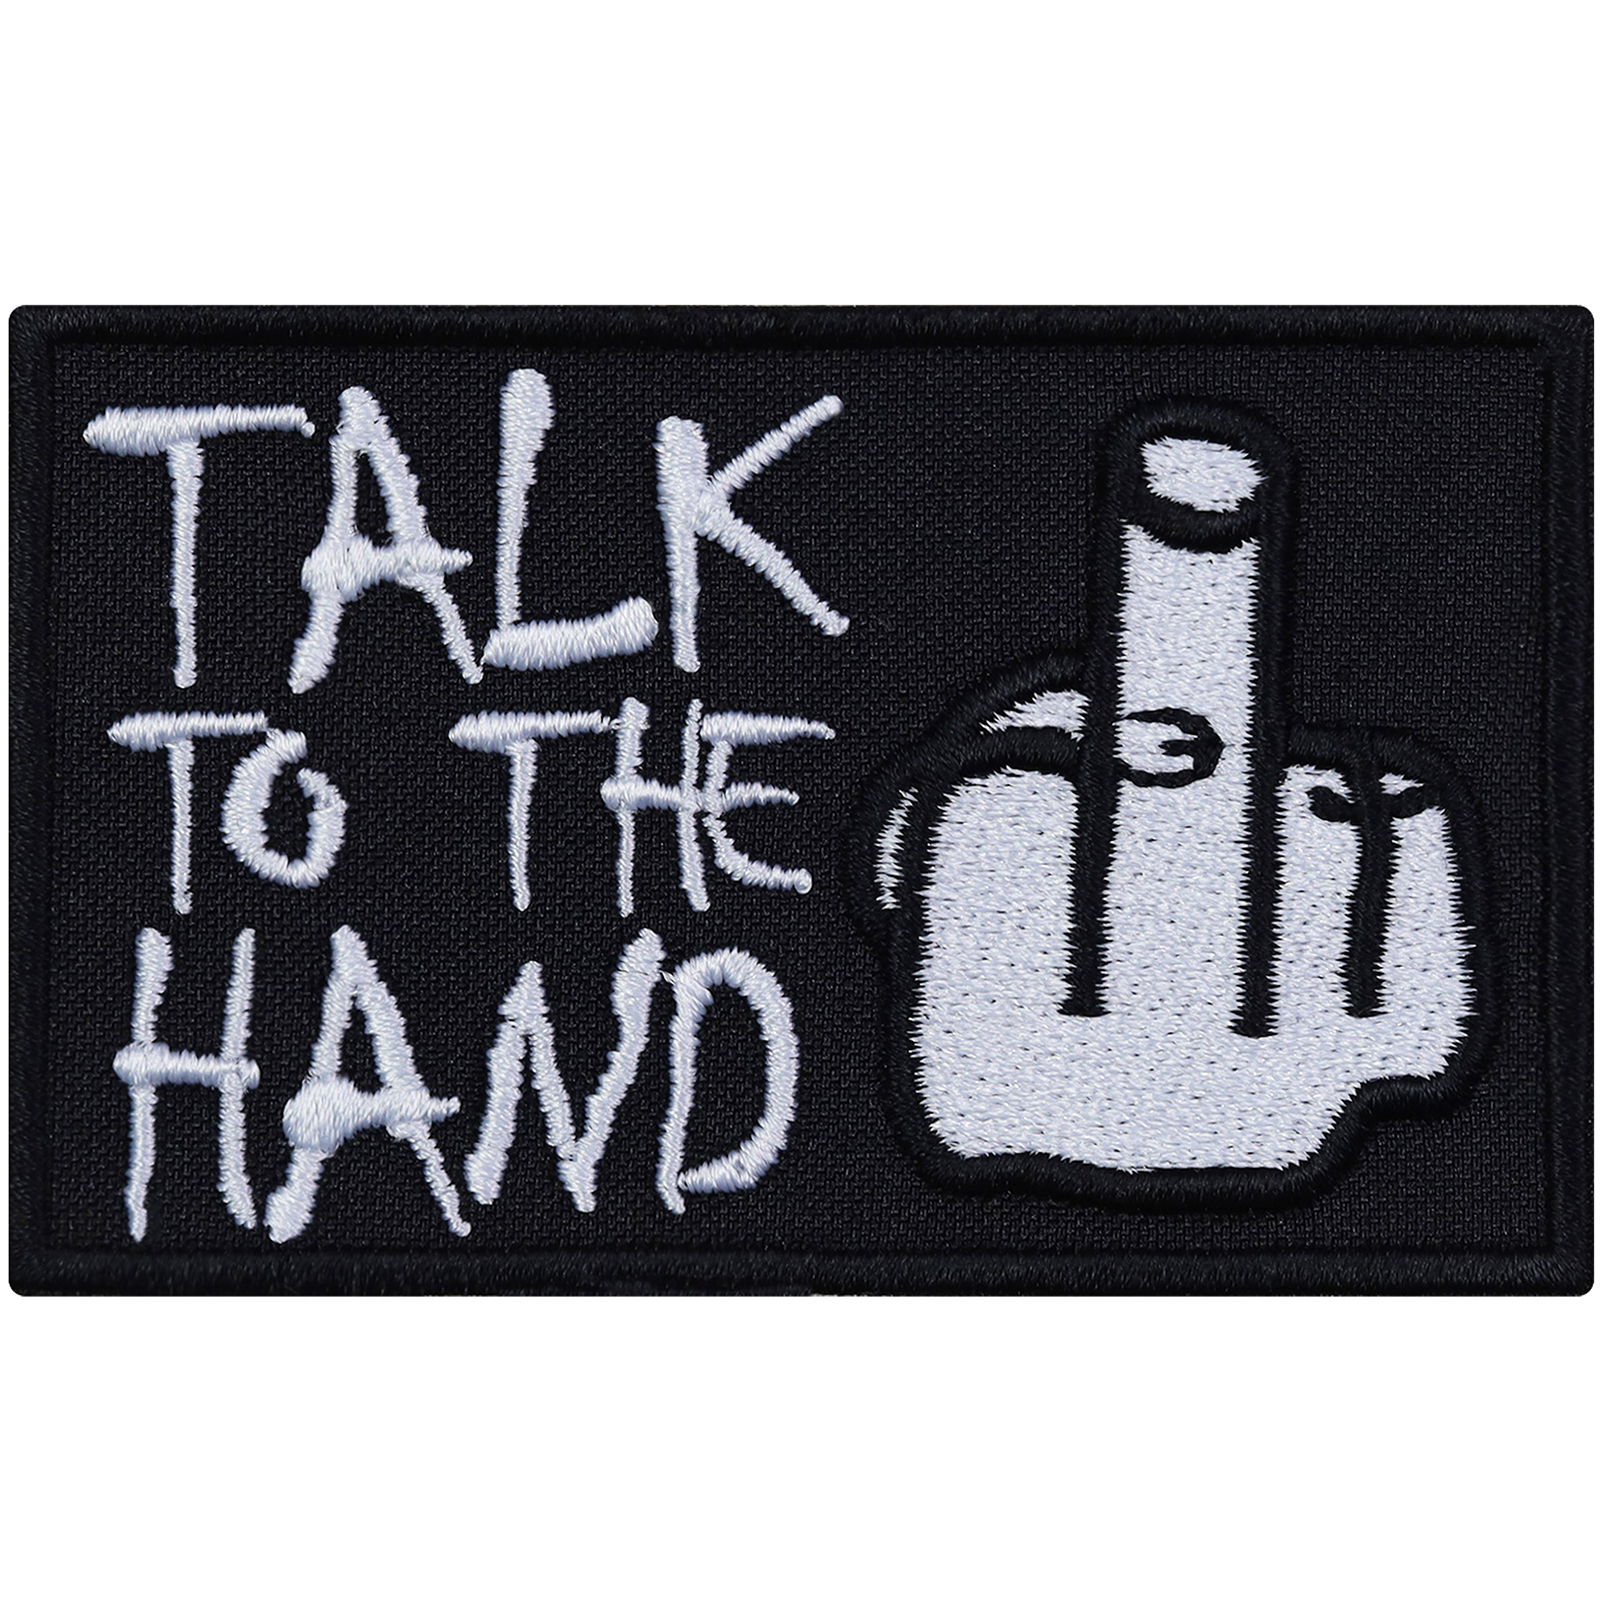 Talk to the hand - Patch